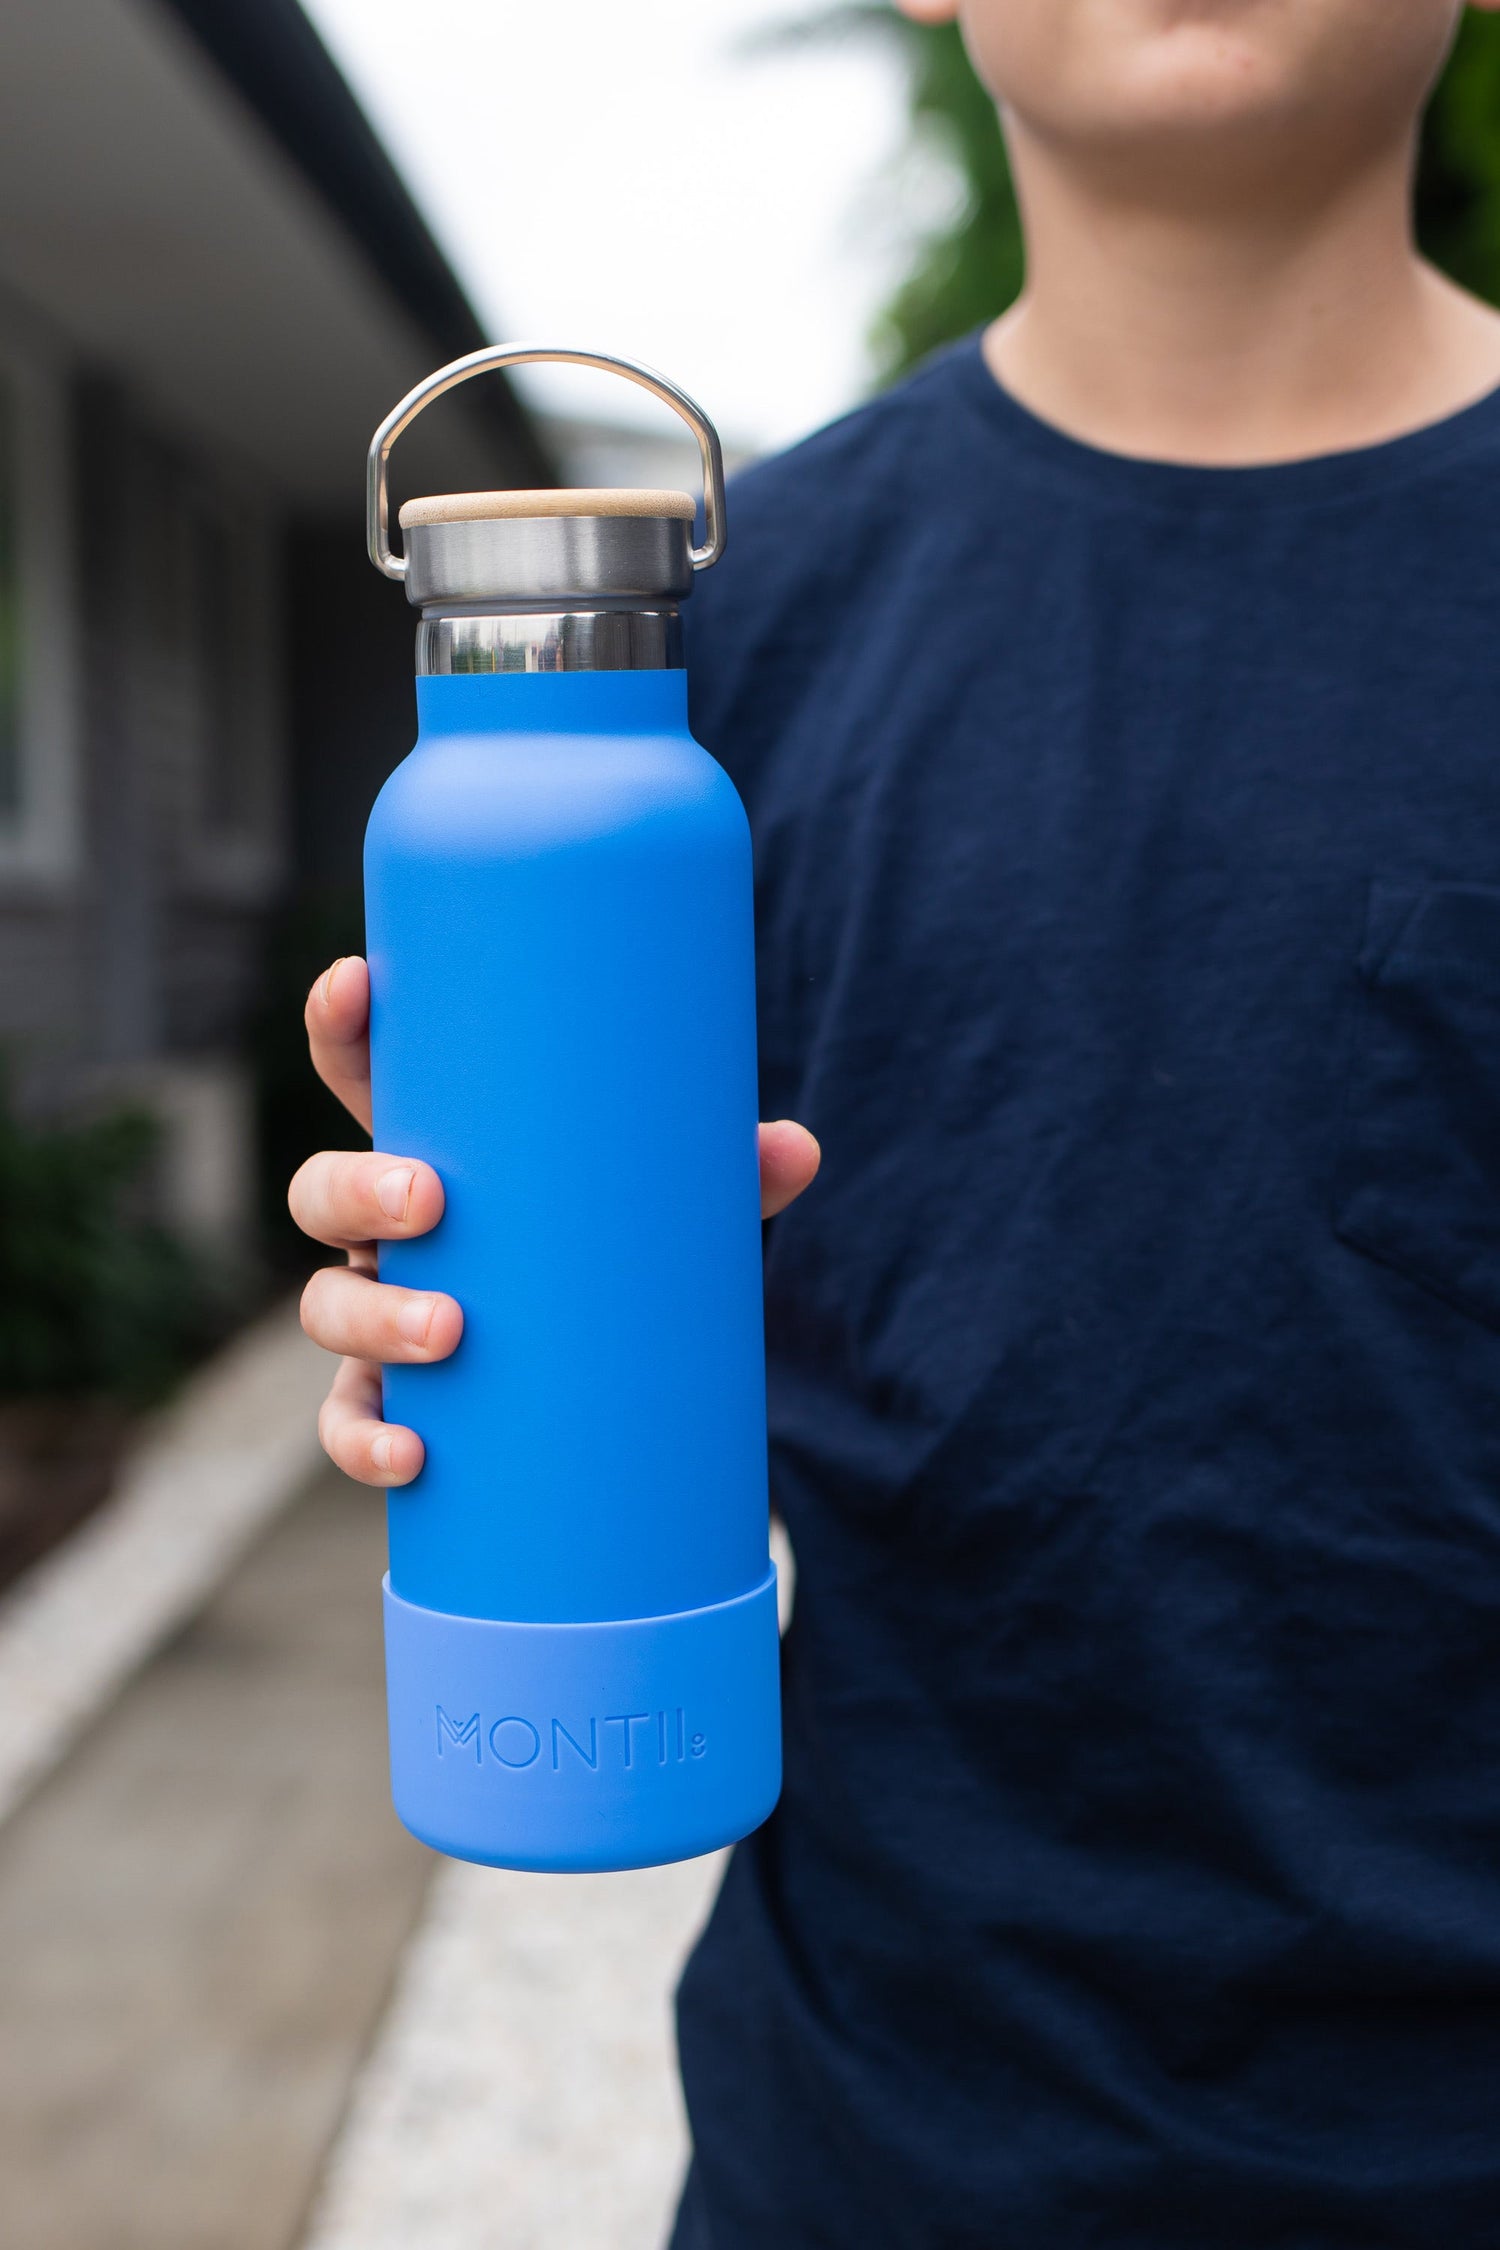 MONTIICO DRINK BOTTLE - ORIGINAL Kiwi by MONTIICO - The Playful Collective